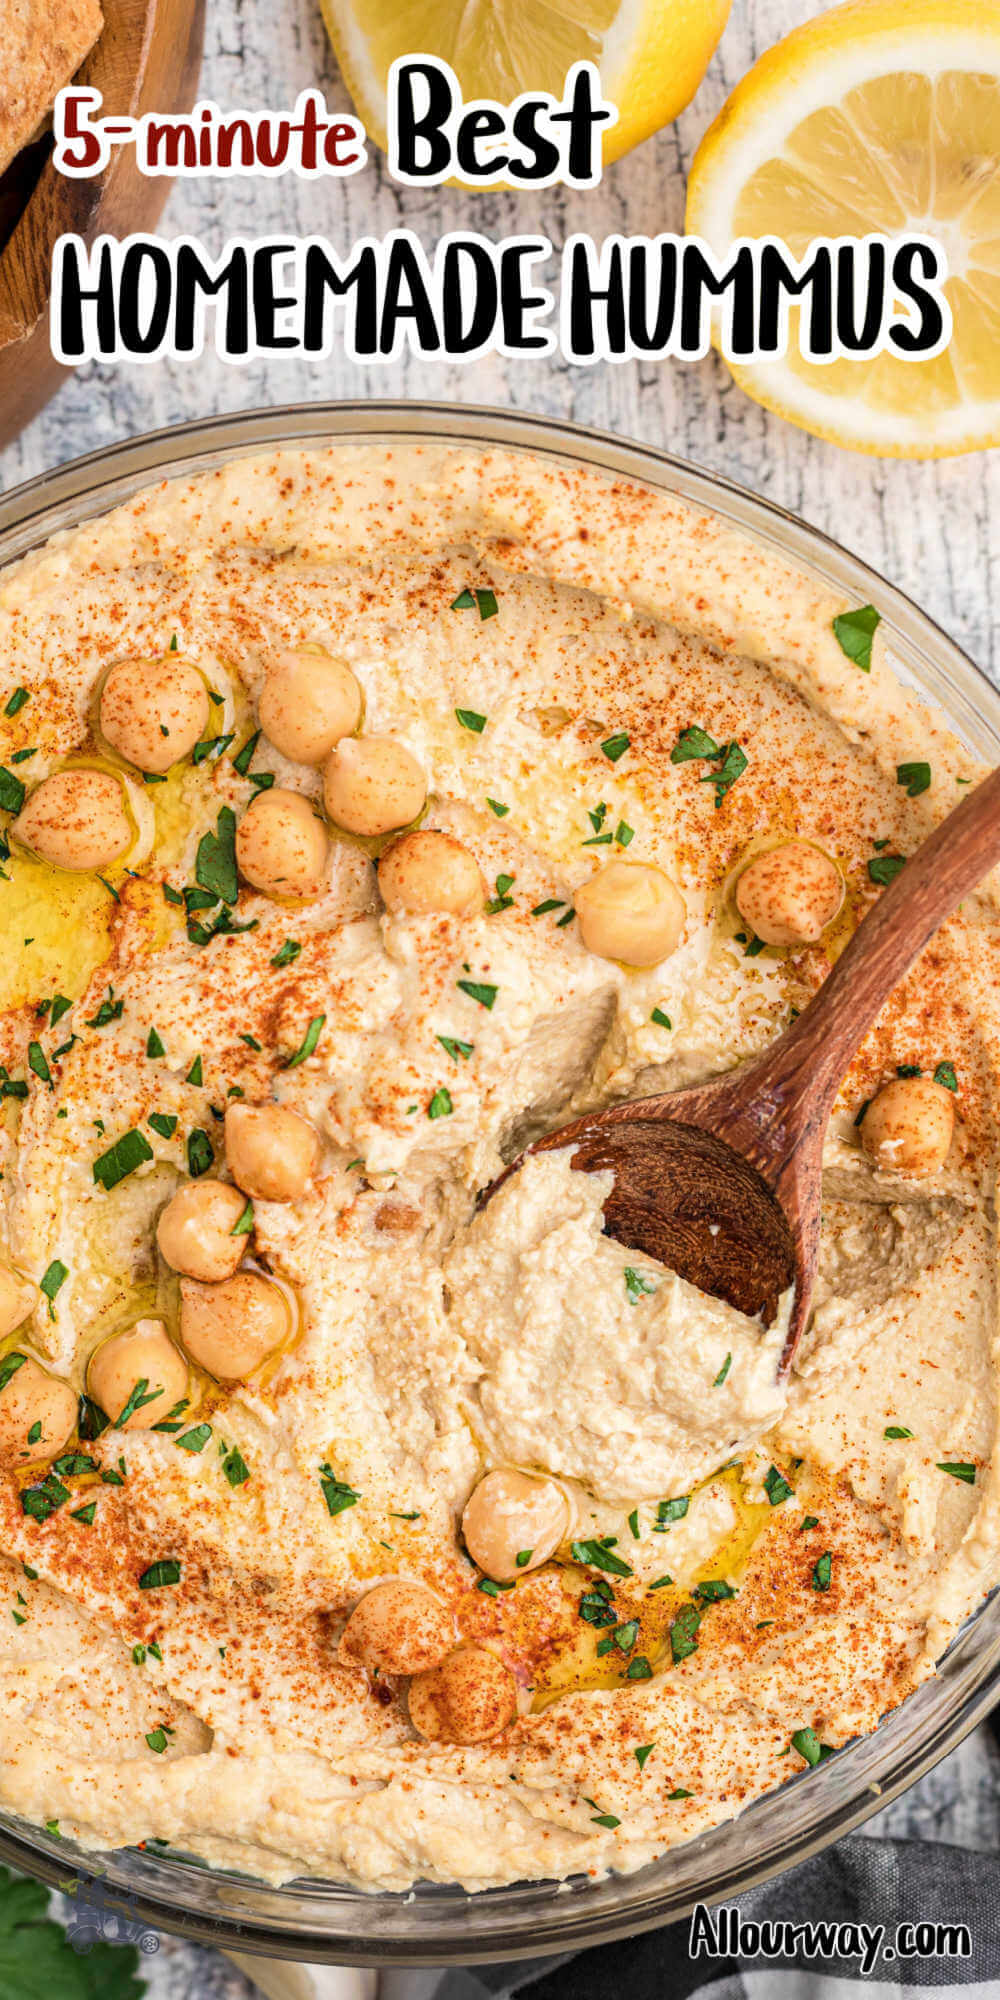 Pinterest image with title overlay for 5-minute Homemade hummus with title overlay.